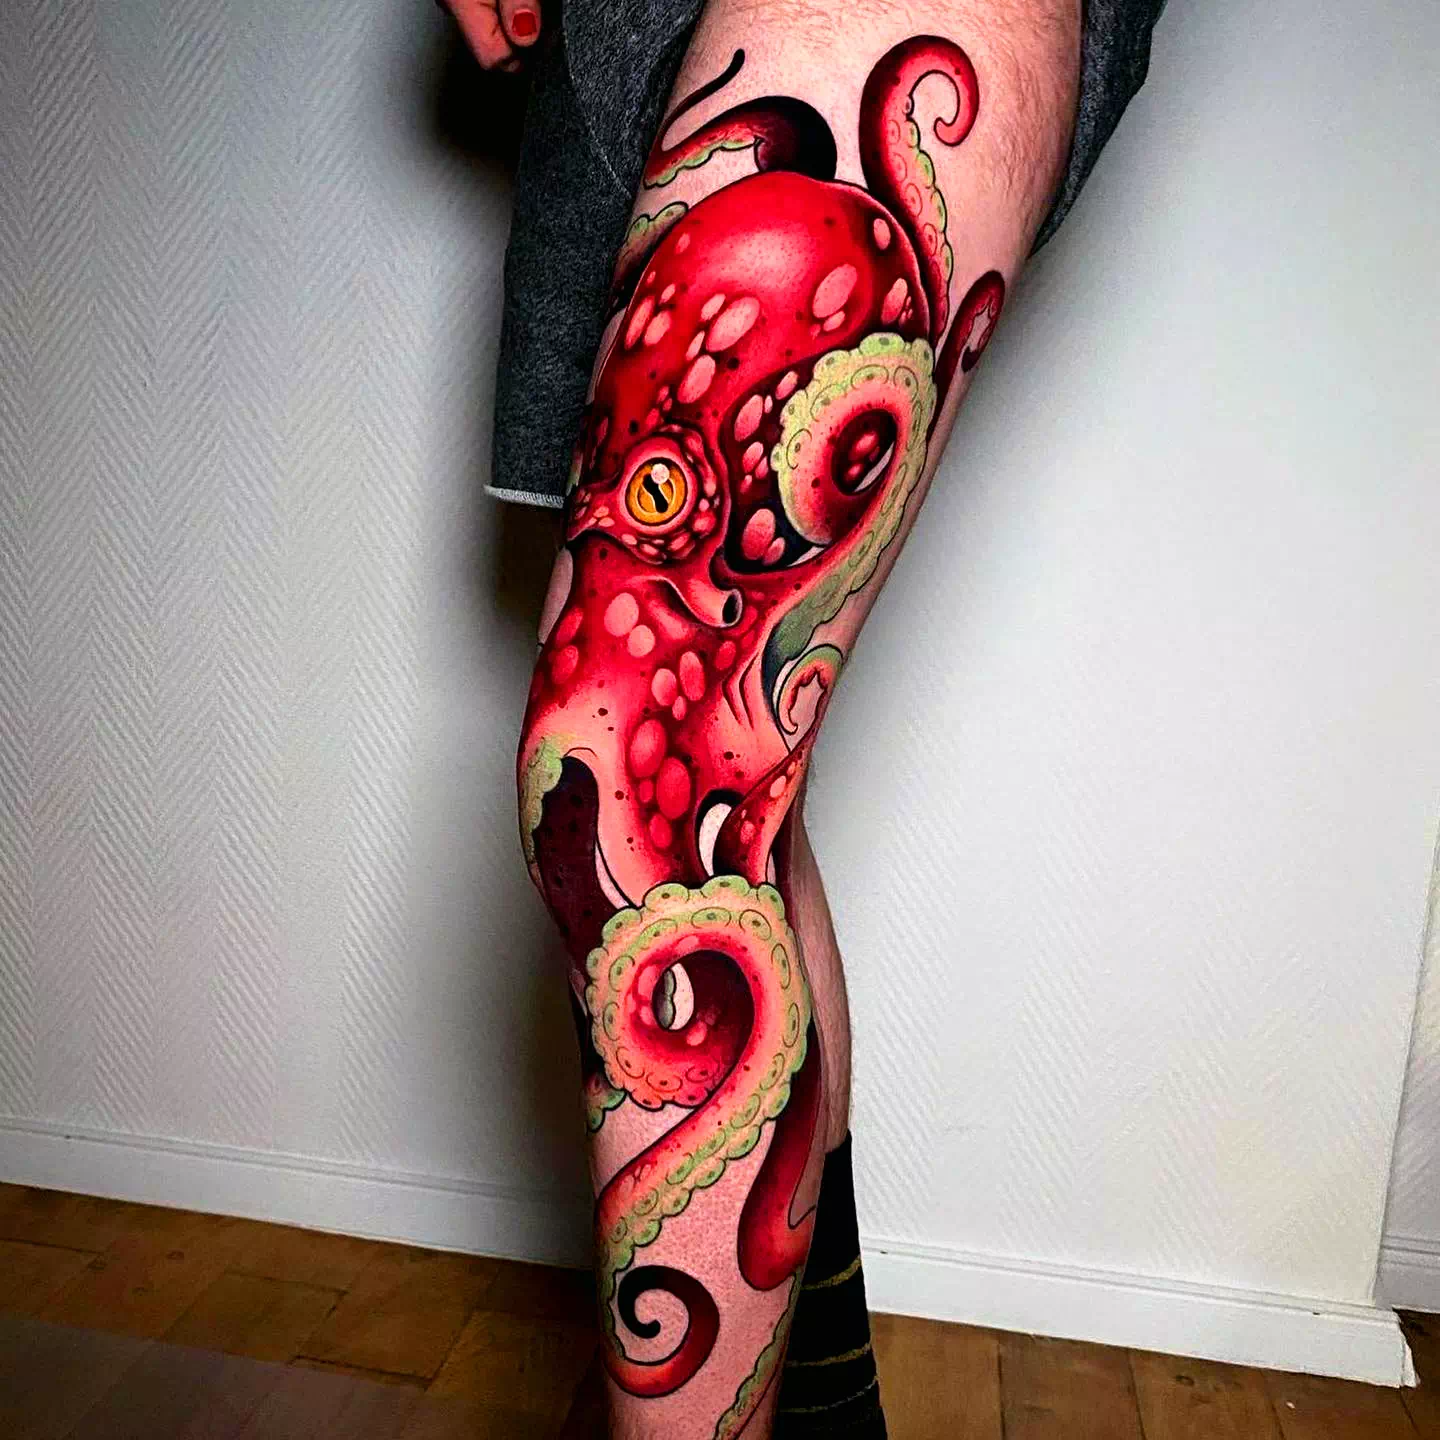 Traditional Octopus Tattoo 1